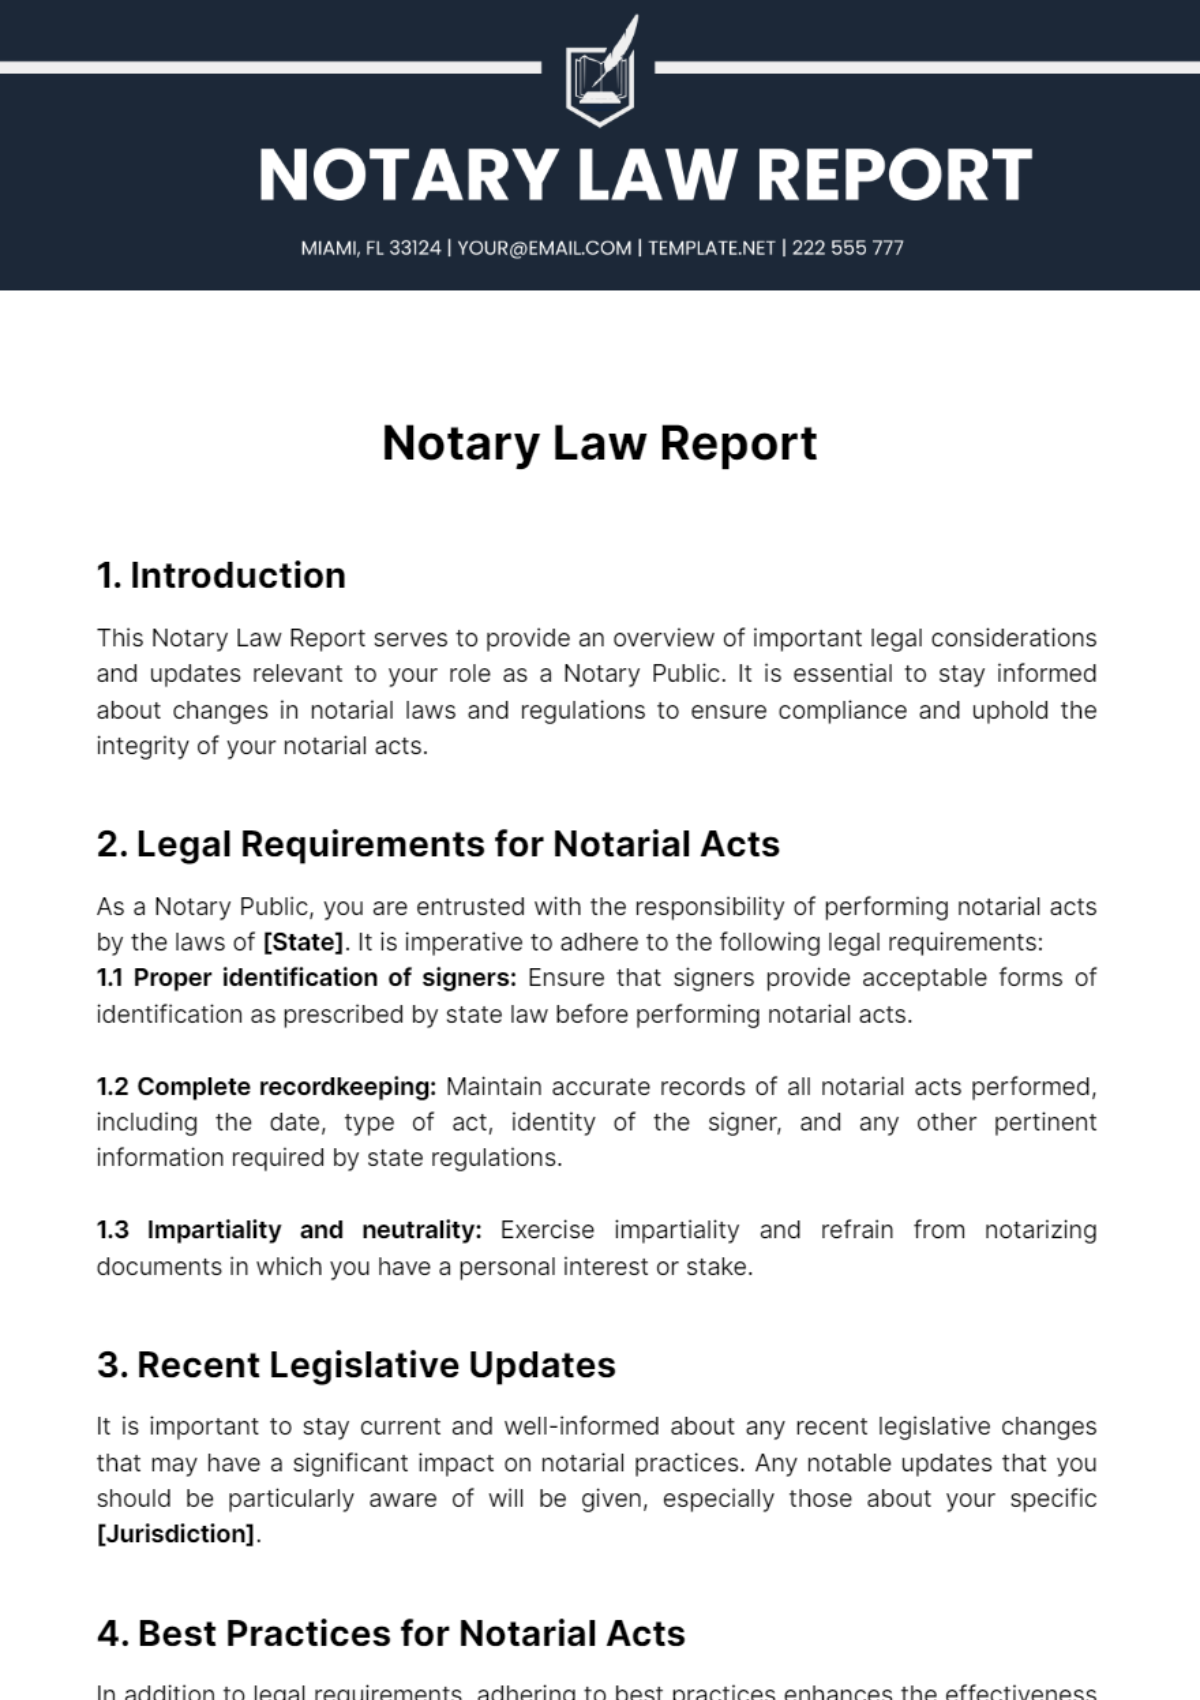 Notary Law Report Template